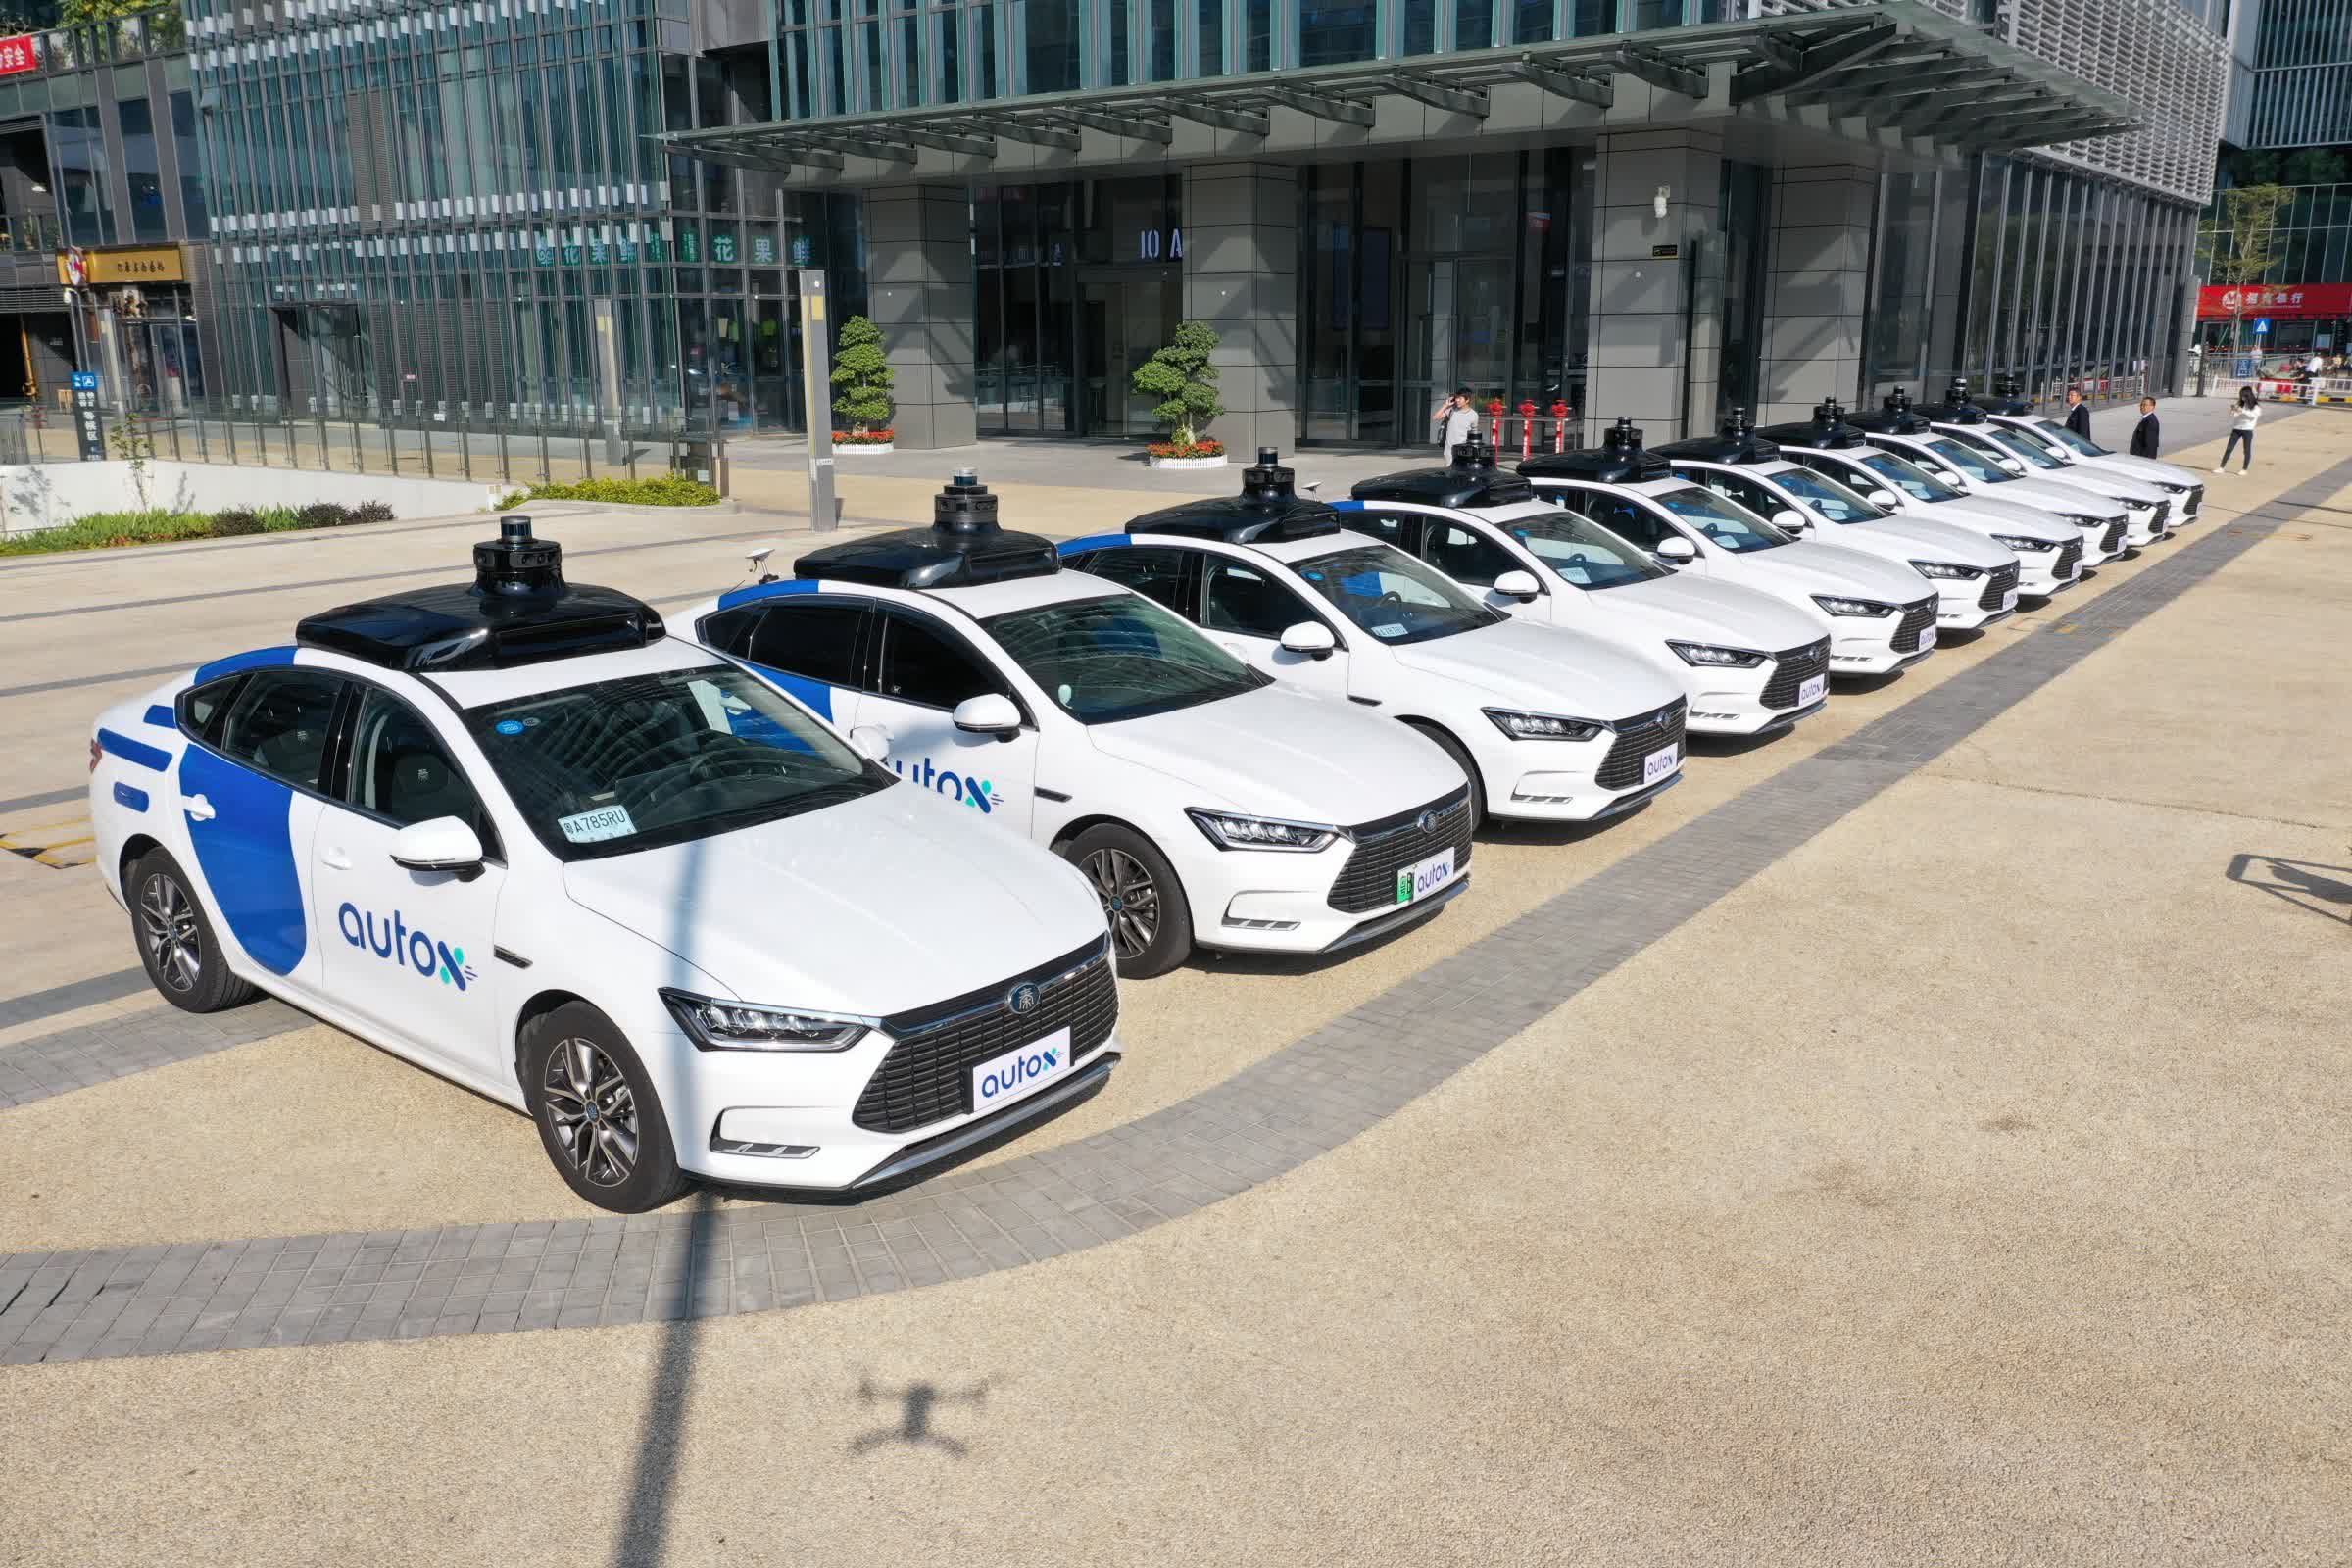 AutoX is the first company to deploy completely driverless vehicles on China's streets